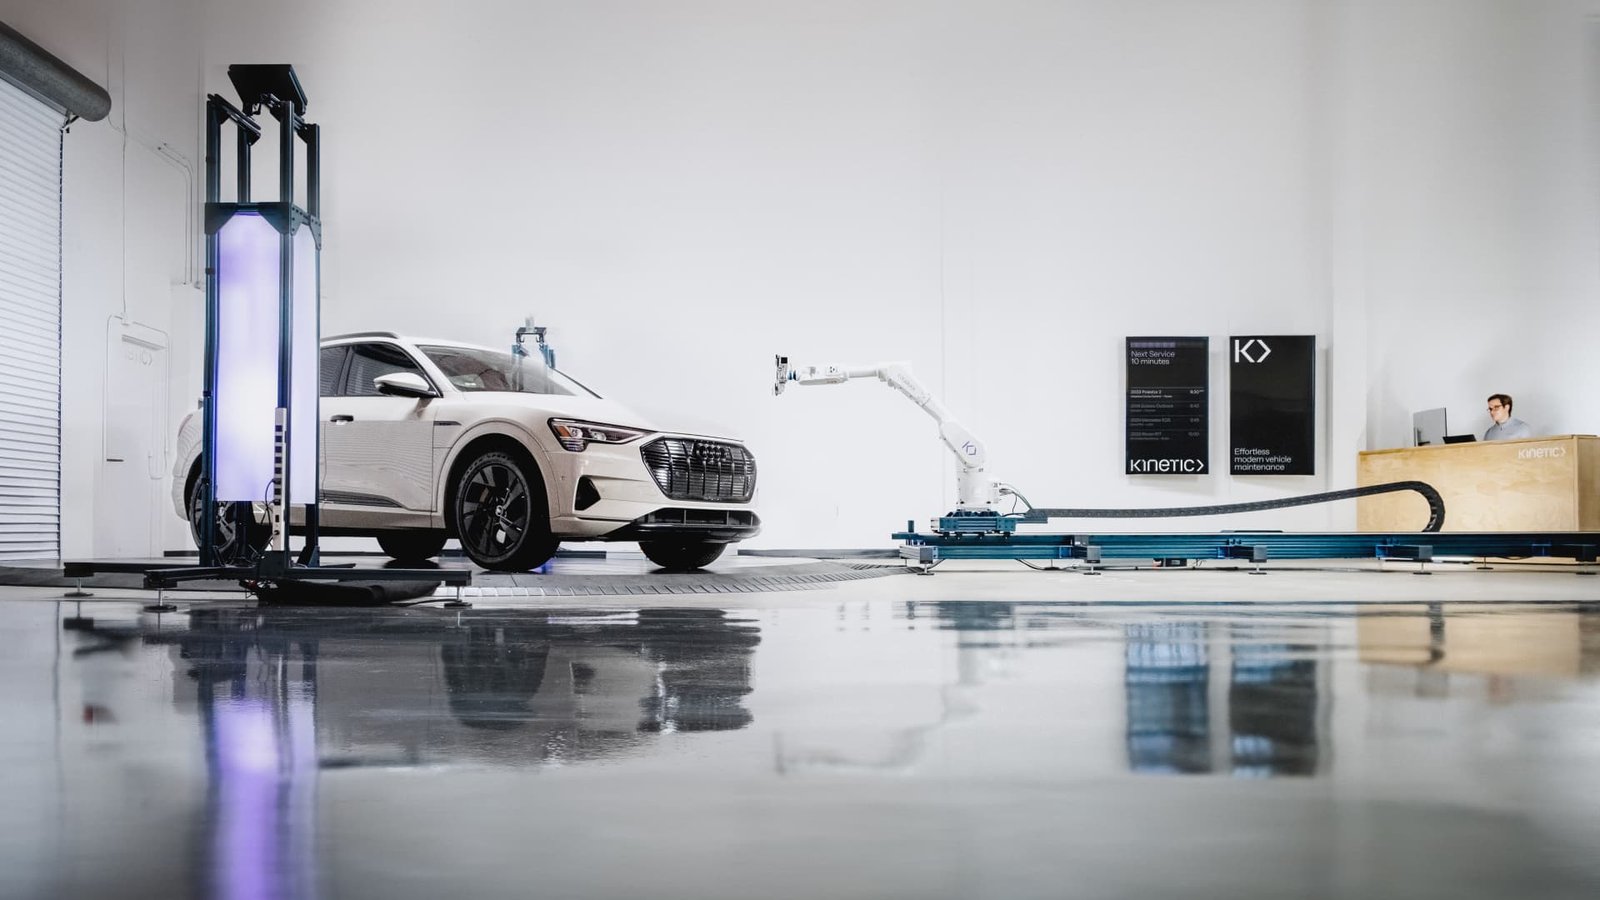 Kinetic rolls out robots to repair electrical vehicles, and sometime robotaxis